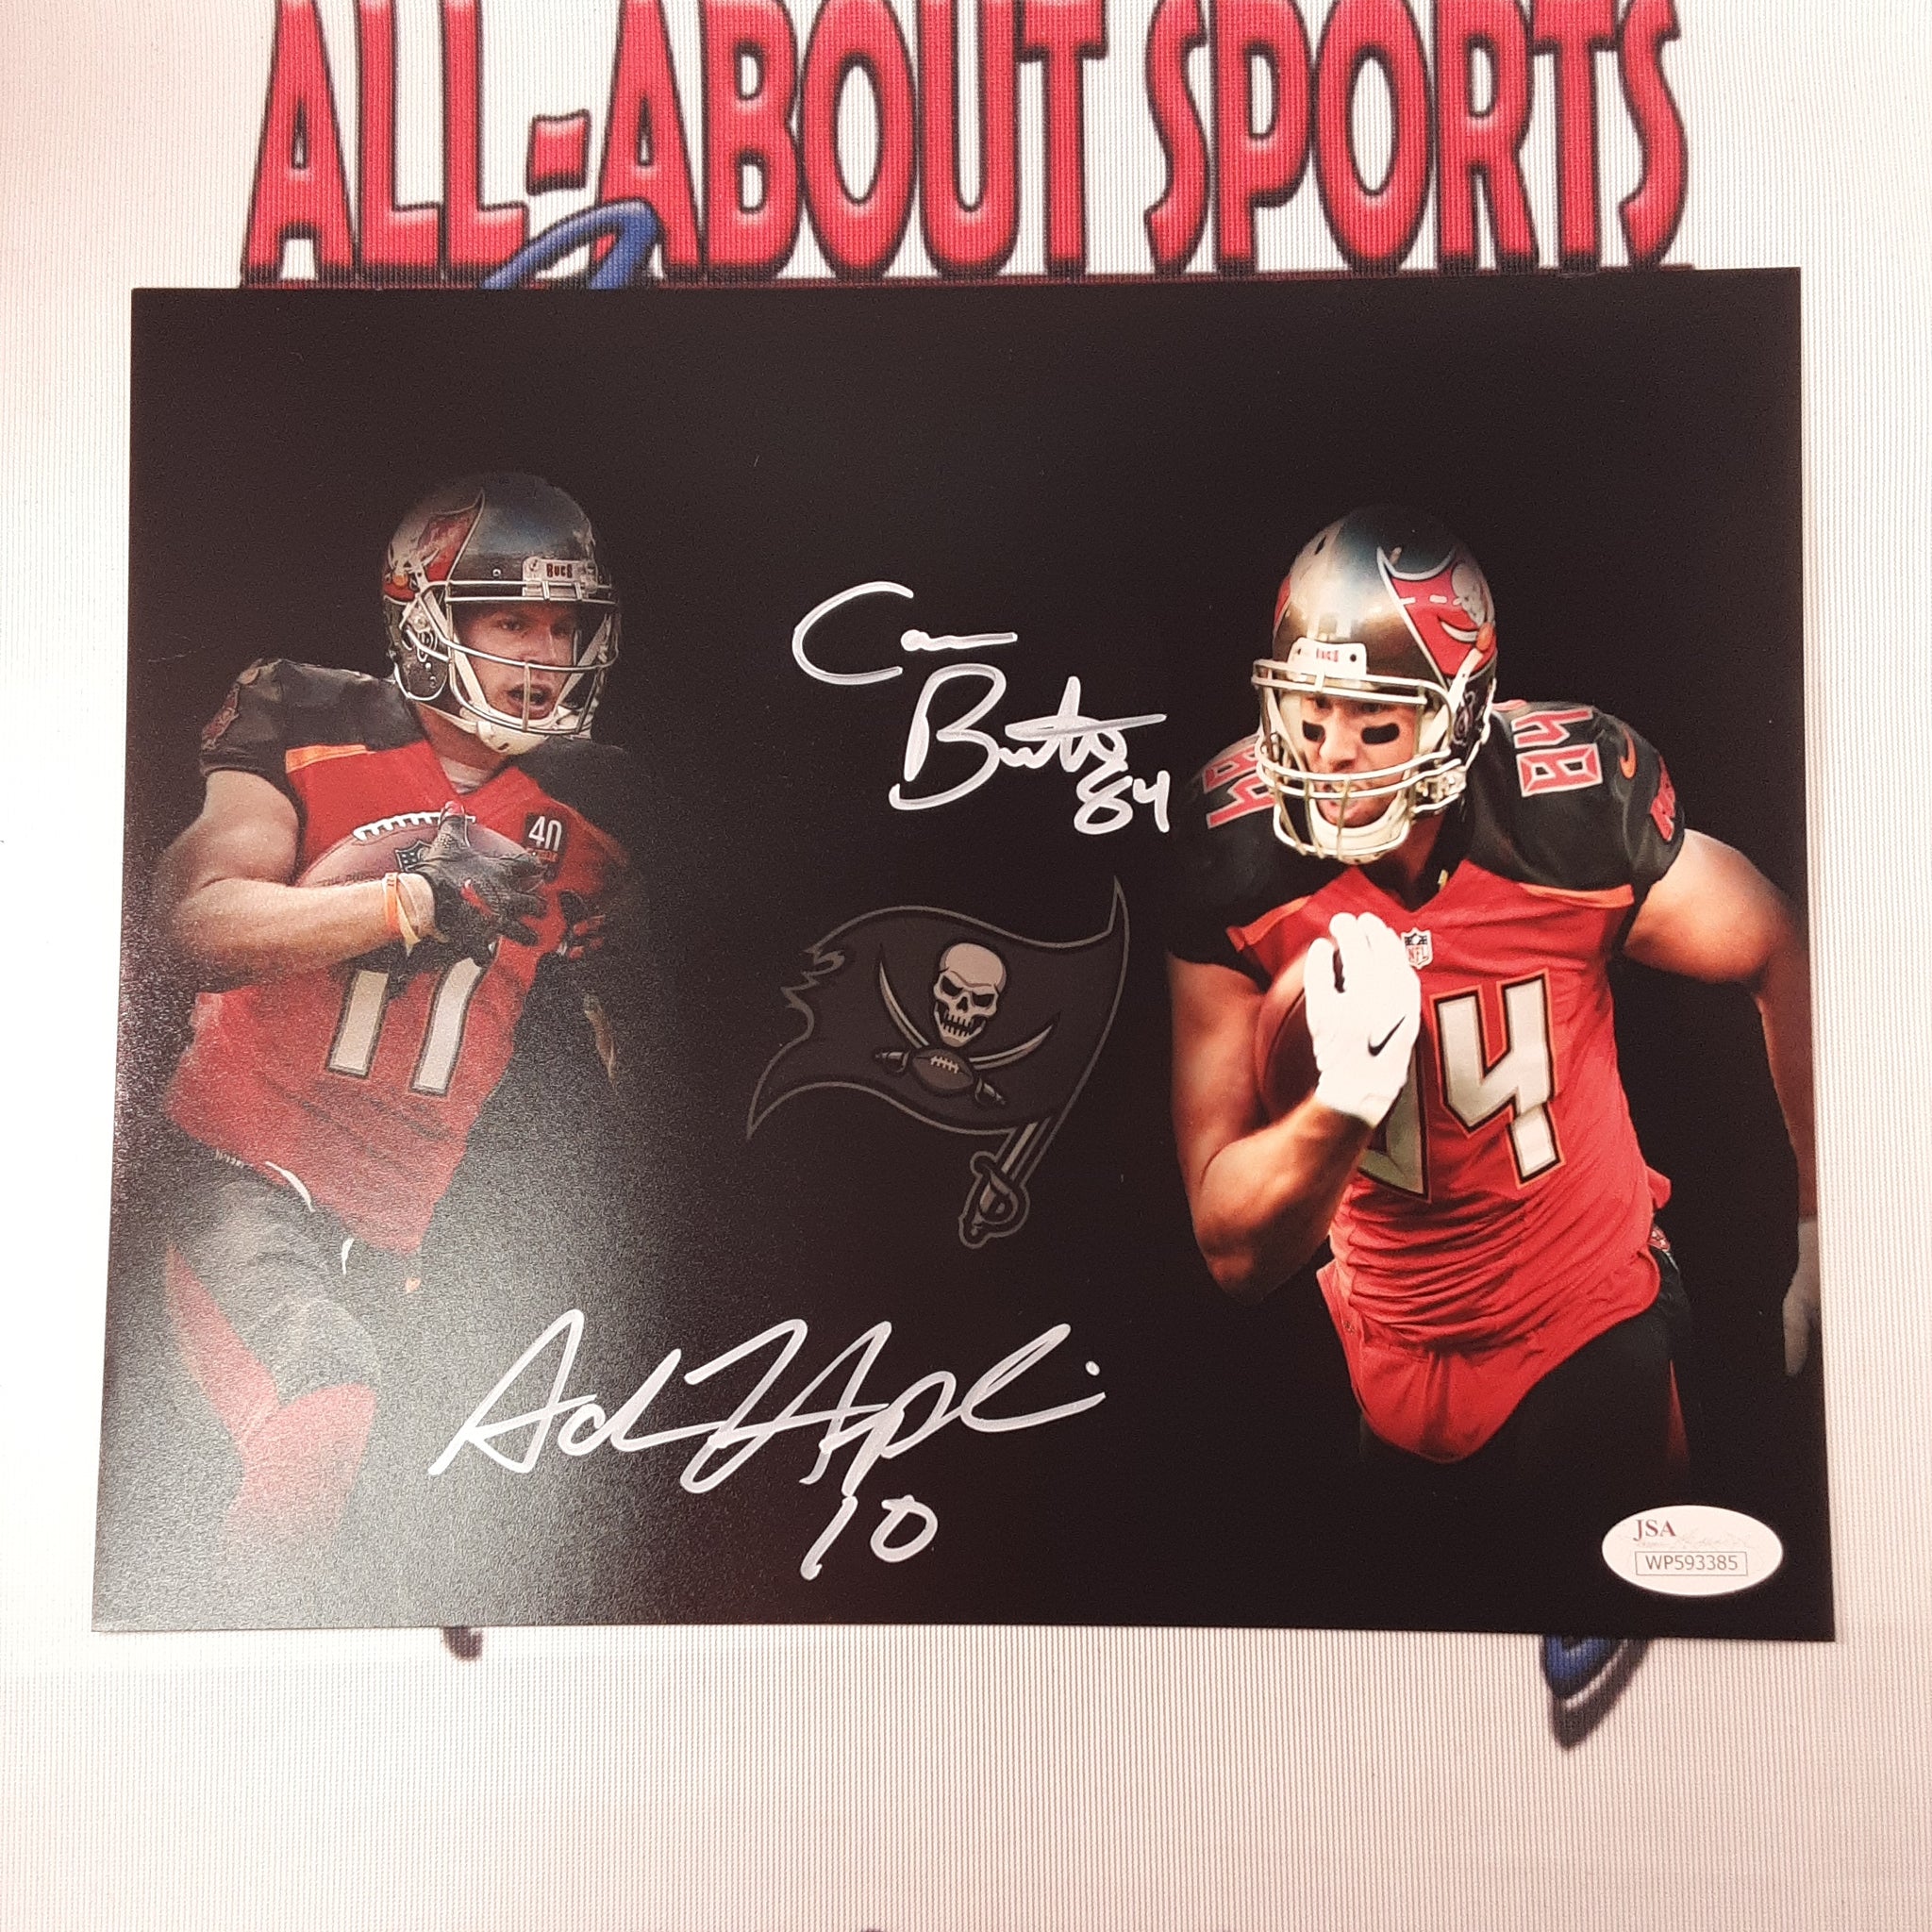 Cameron Brate and Adam Humphries Authentic Signed 8x10 Photo Autographed JSA.